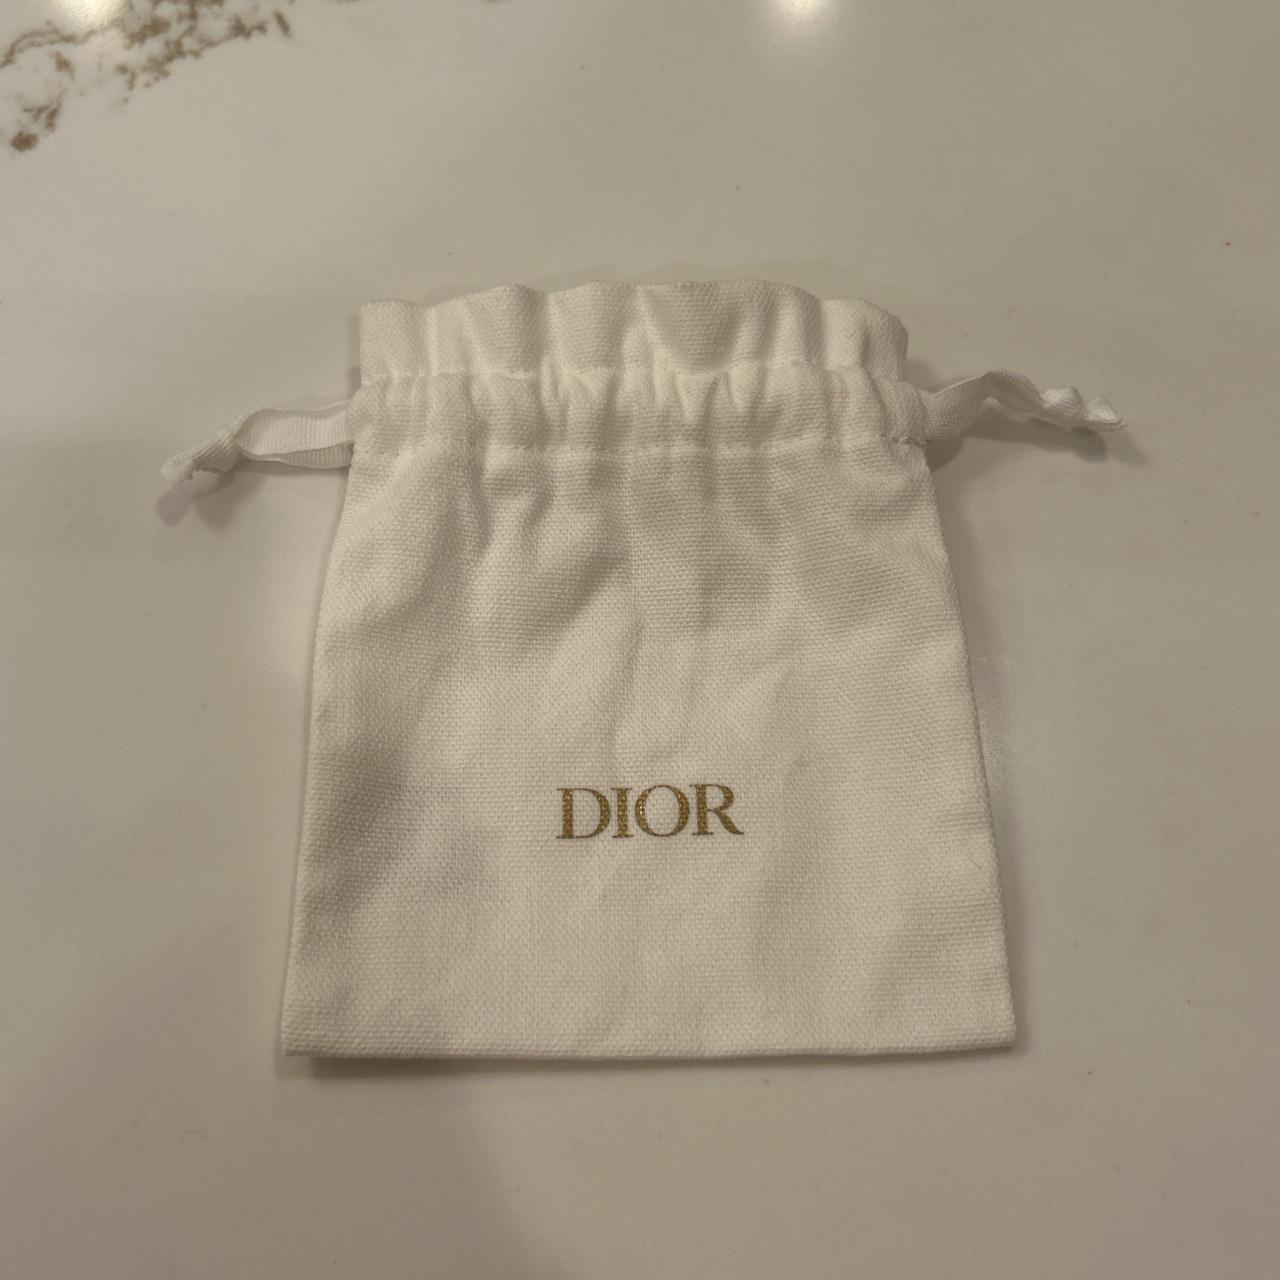 Dior pouch! Brand new and so cute!! - Depop